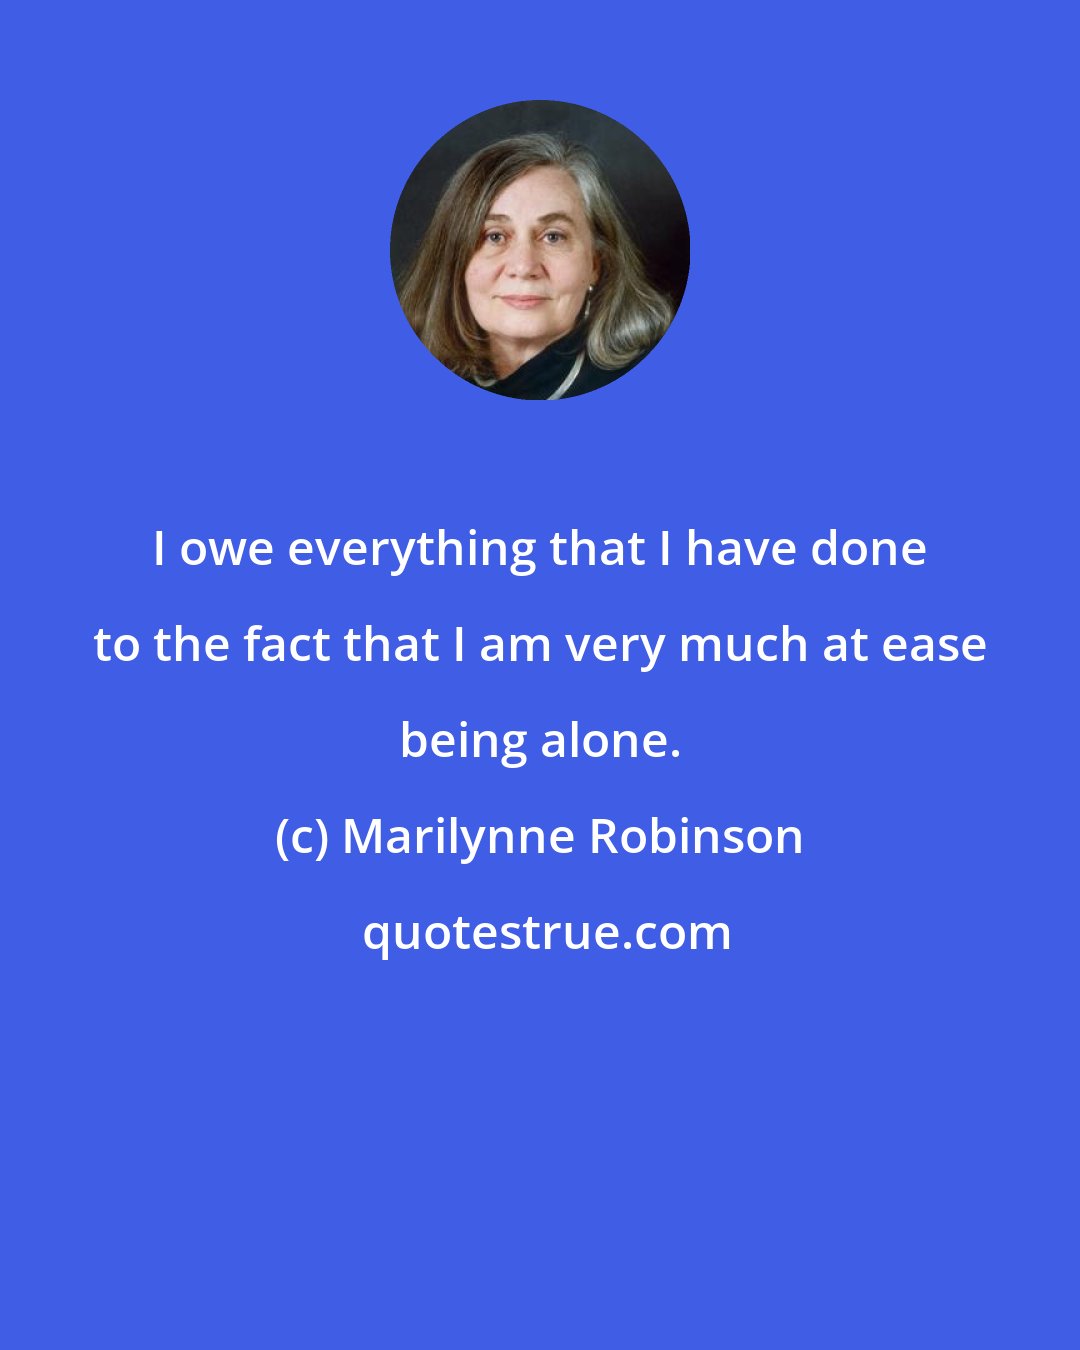 Marilynne Robinson: I owe everything that I have done to the fact that I am very much at ease being alone.